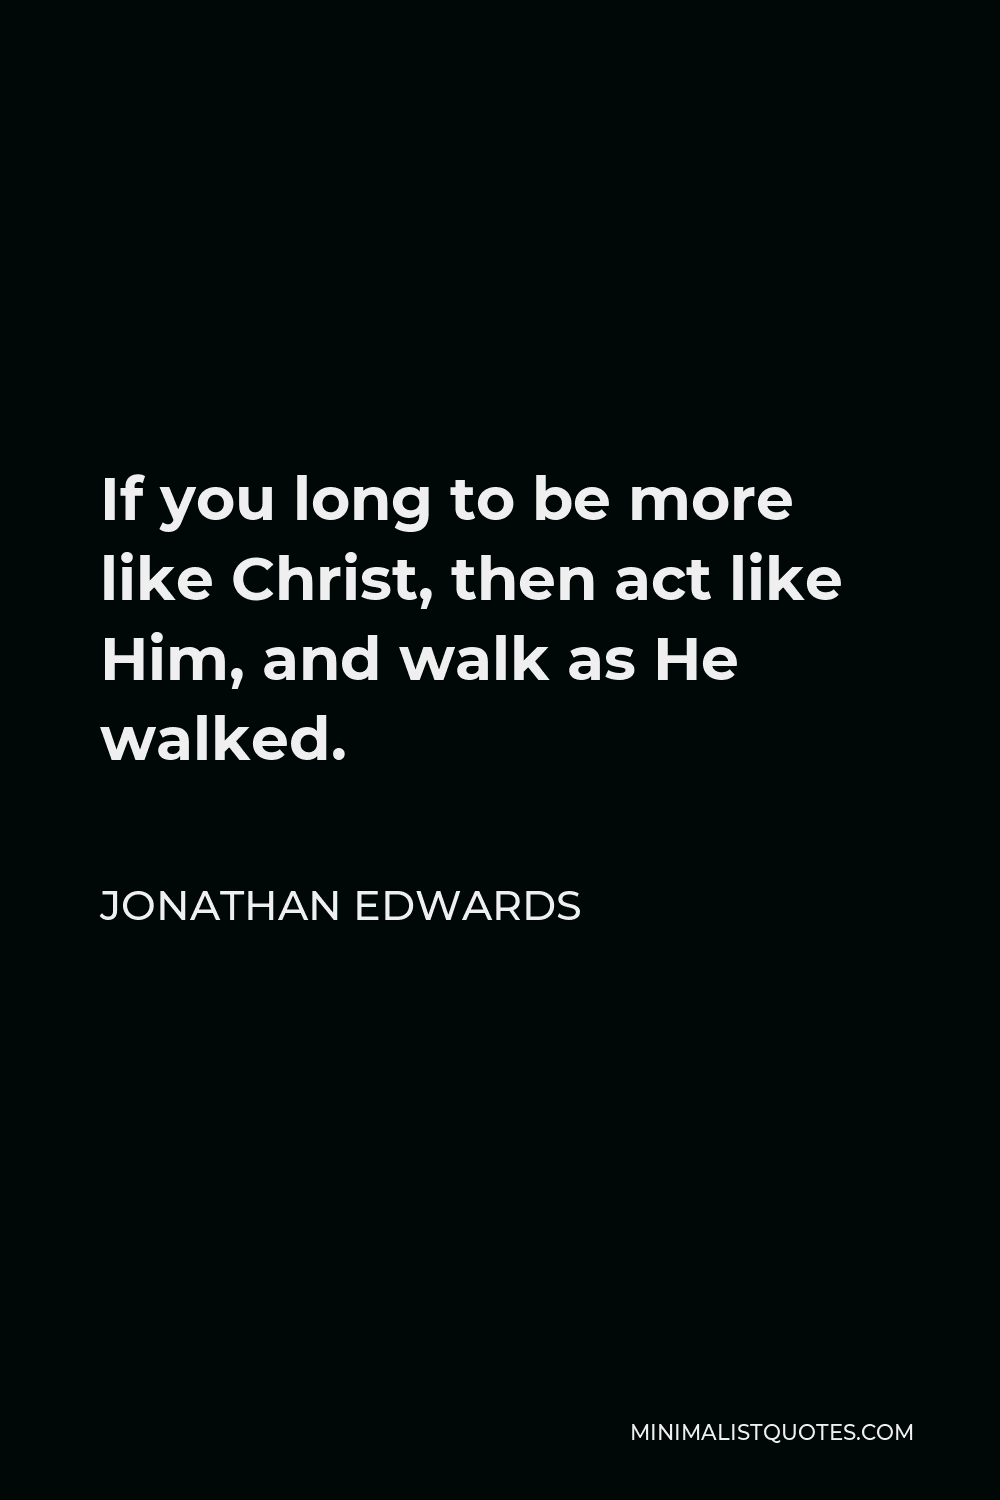 Jonathan Edwards Quote - If you long to be more like Christ, then act like Him, and walk as He walked.